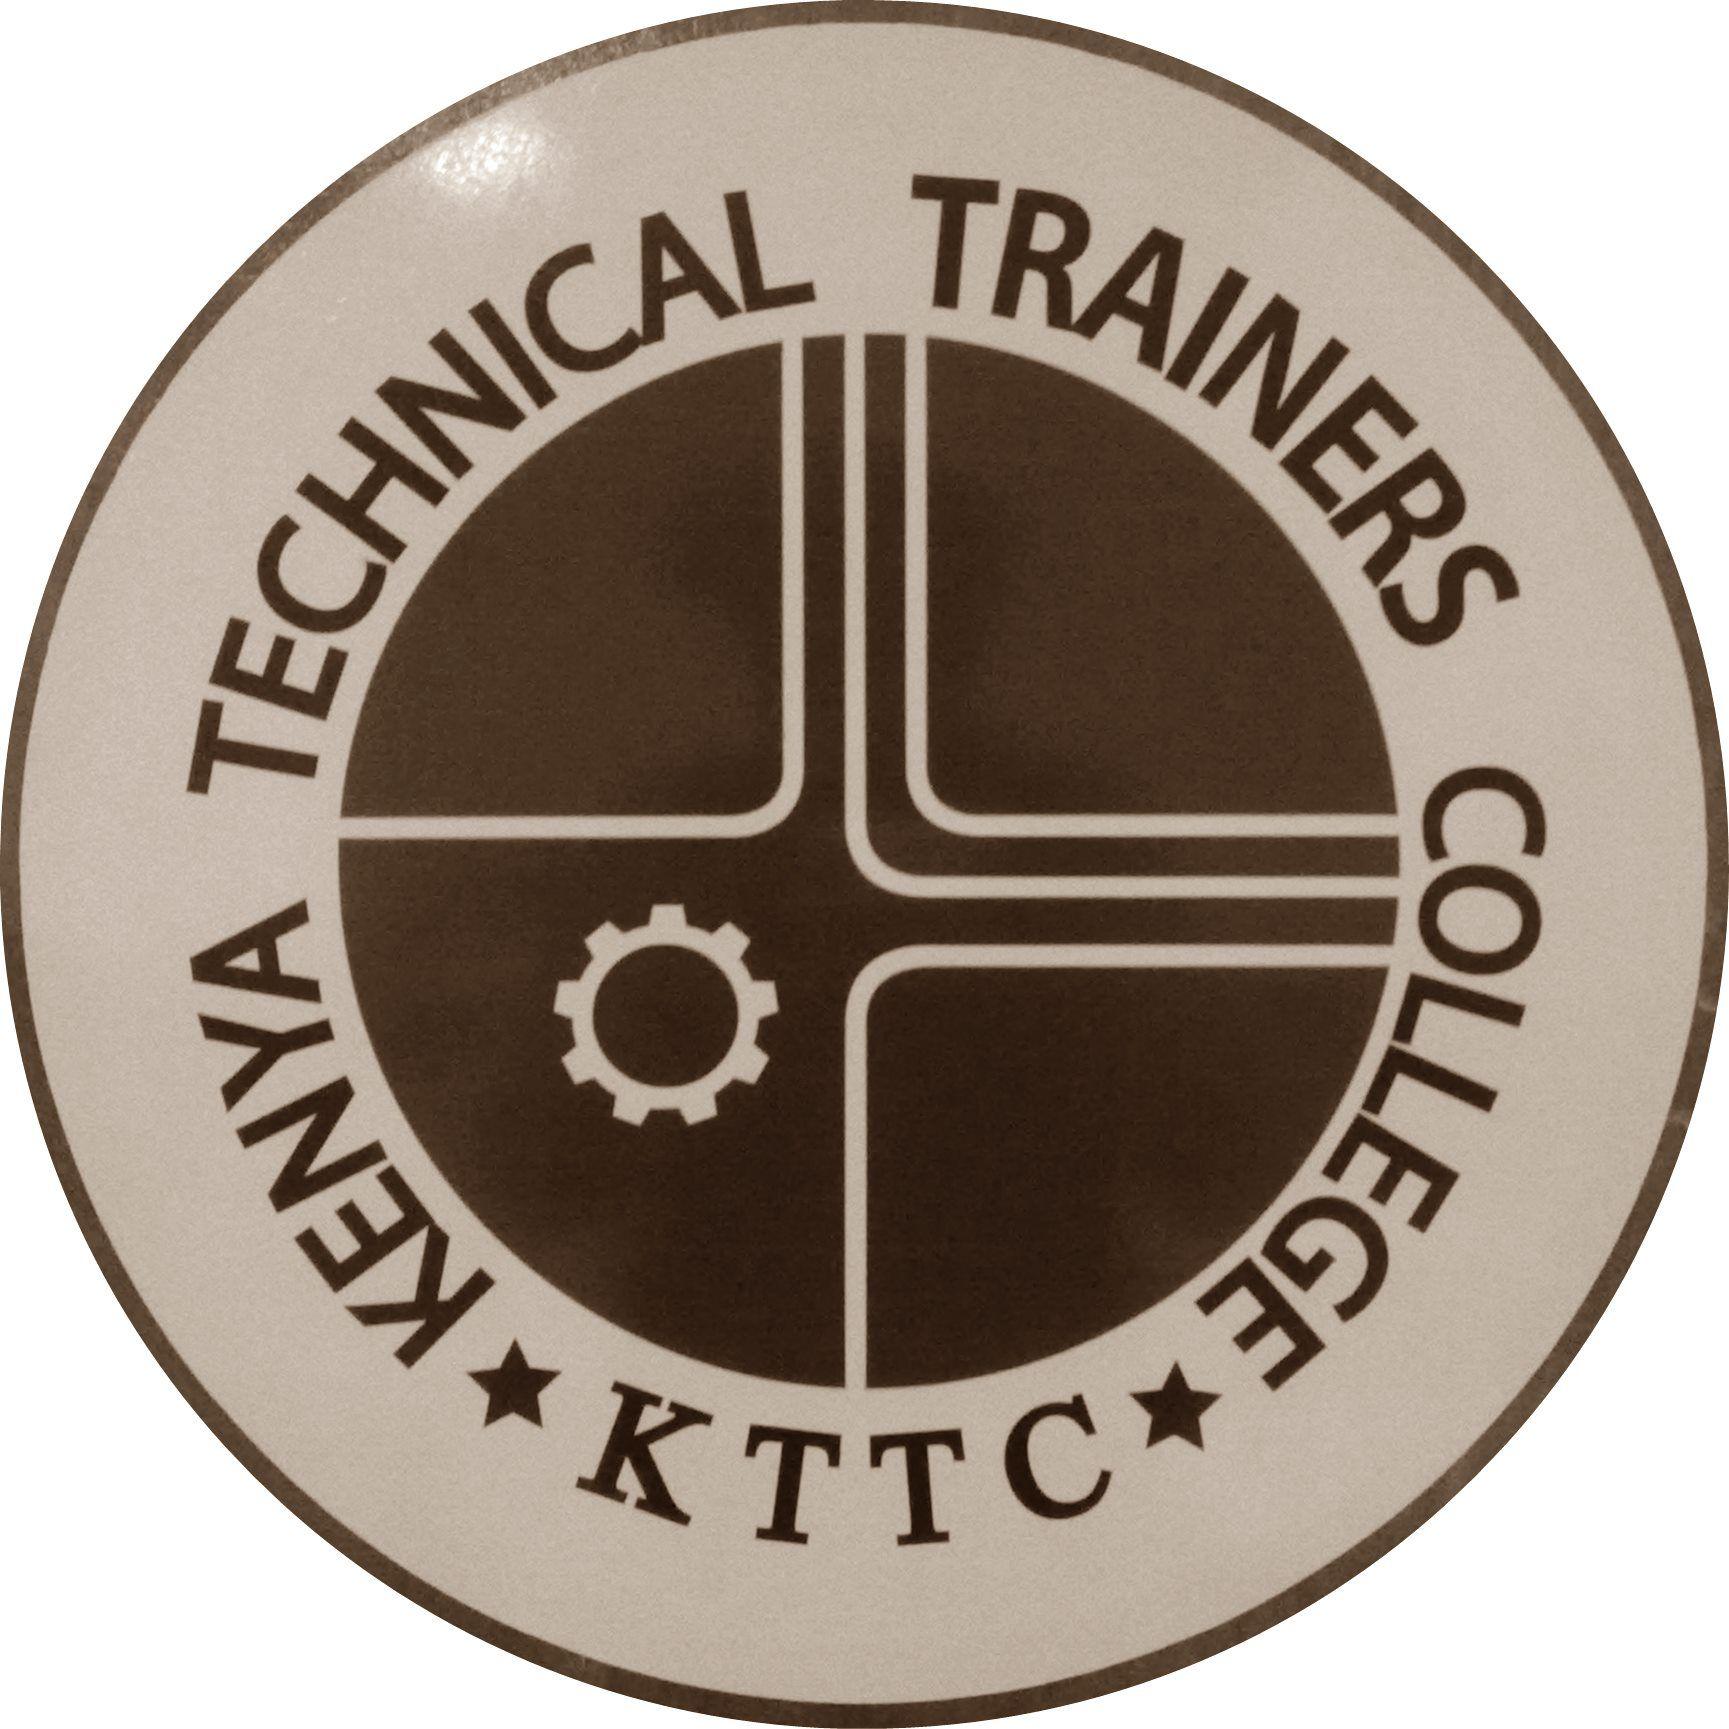 Knec Logo - Kenya Technical Trainers' College